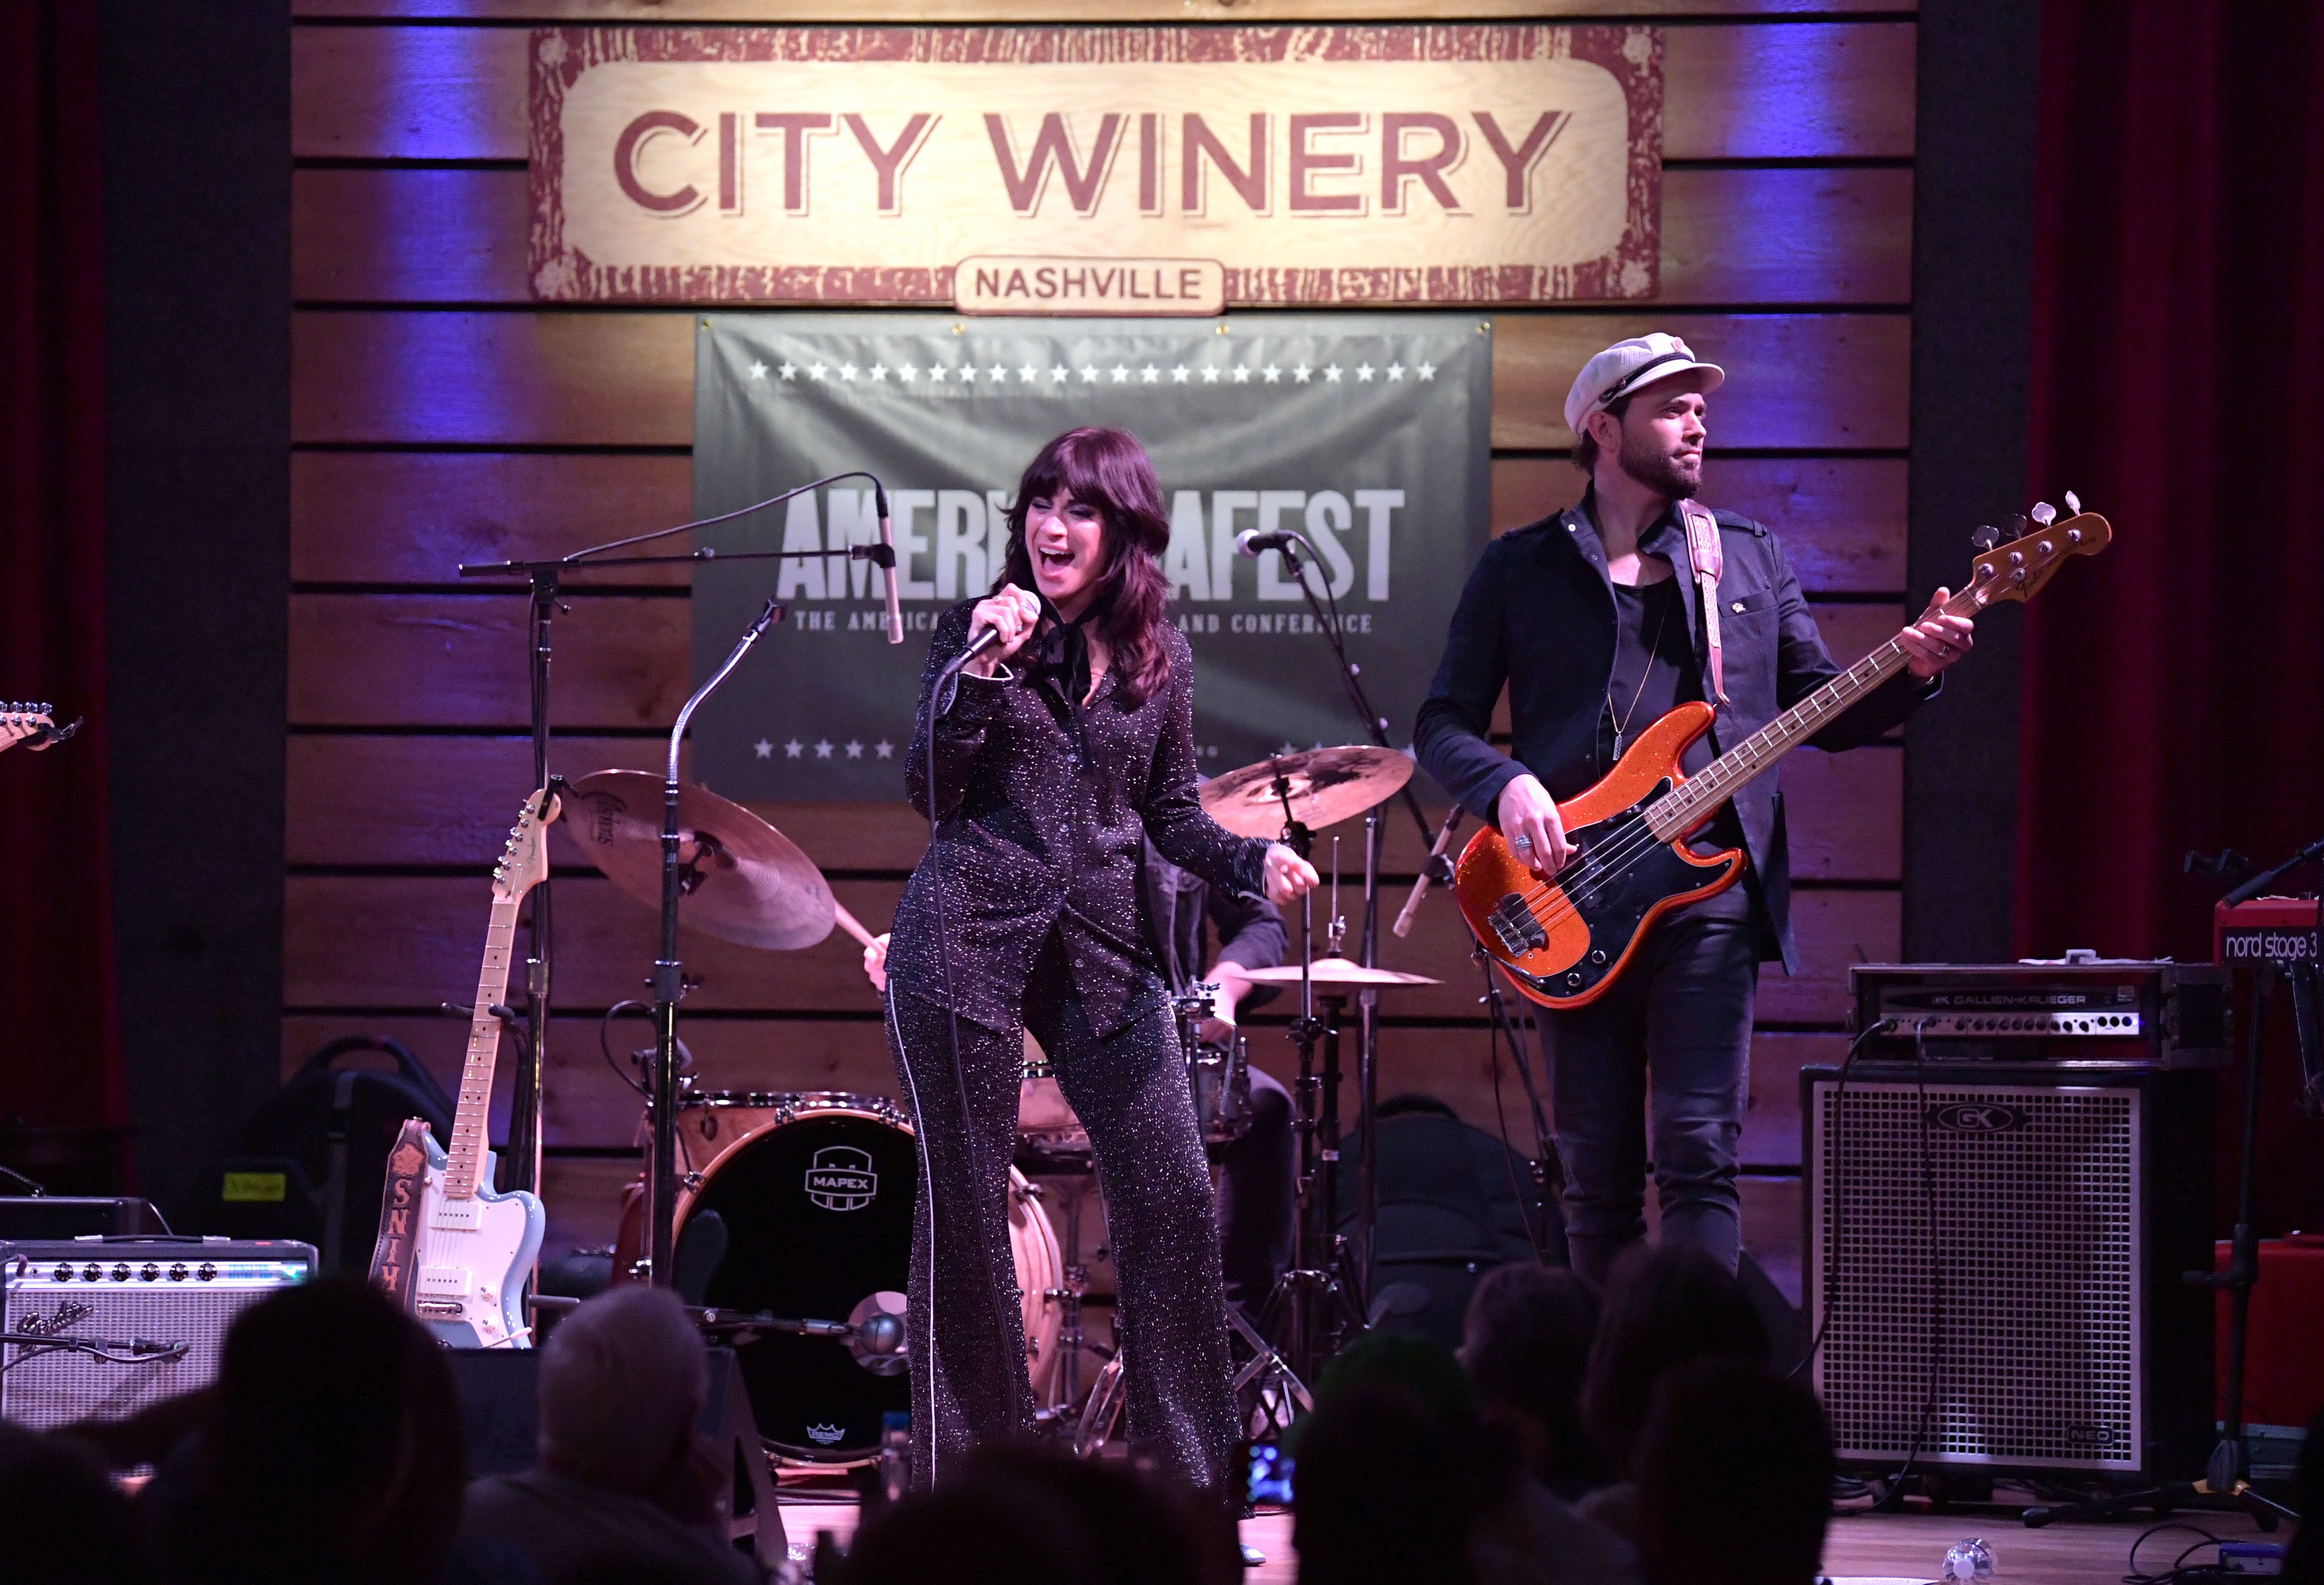 A woman wearing a sparkly suit sings into a microphone on a stage next to a man playing an orange guitar at City Winery in Nashville.